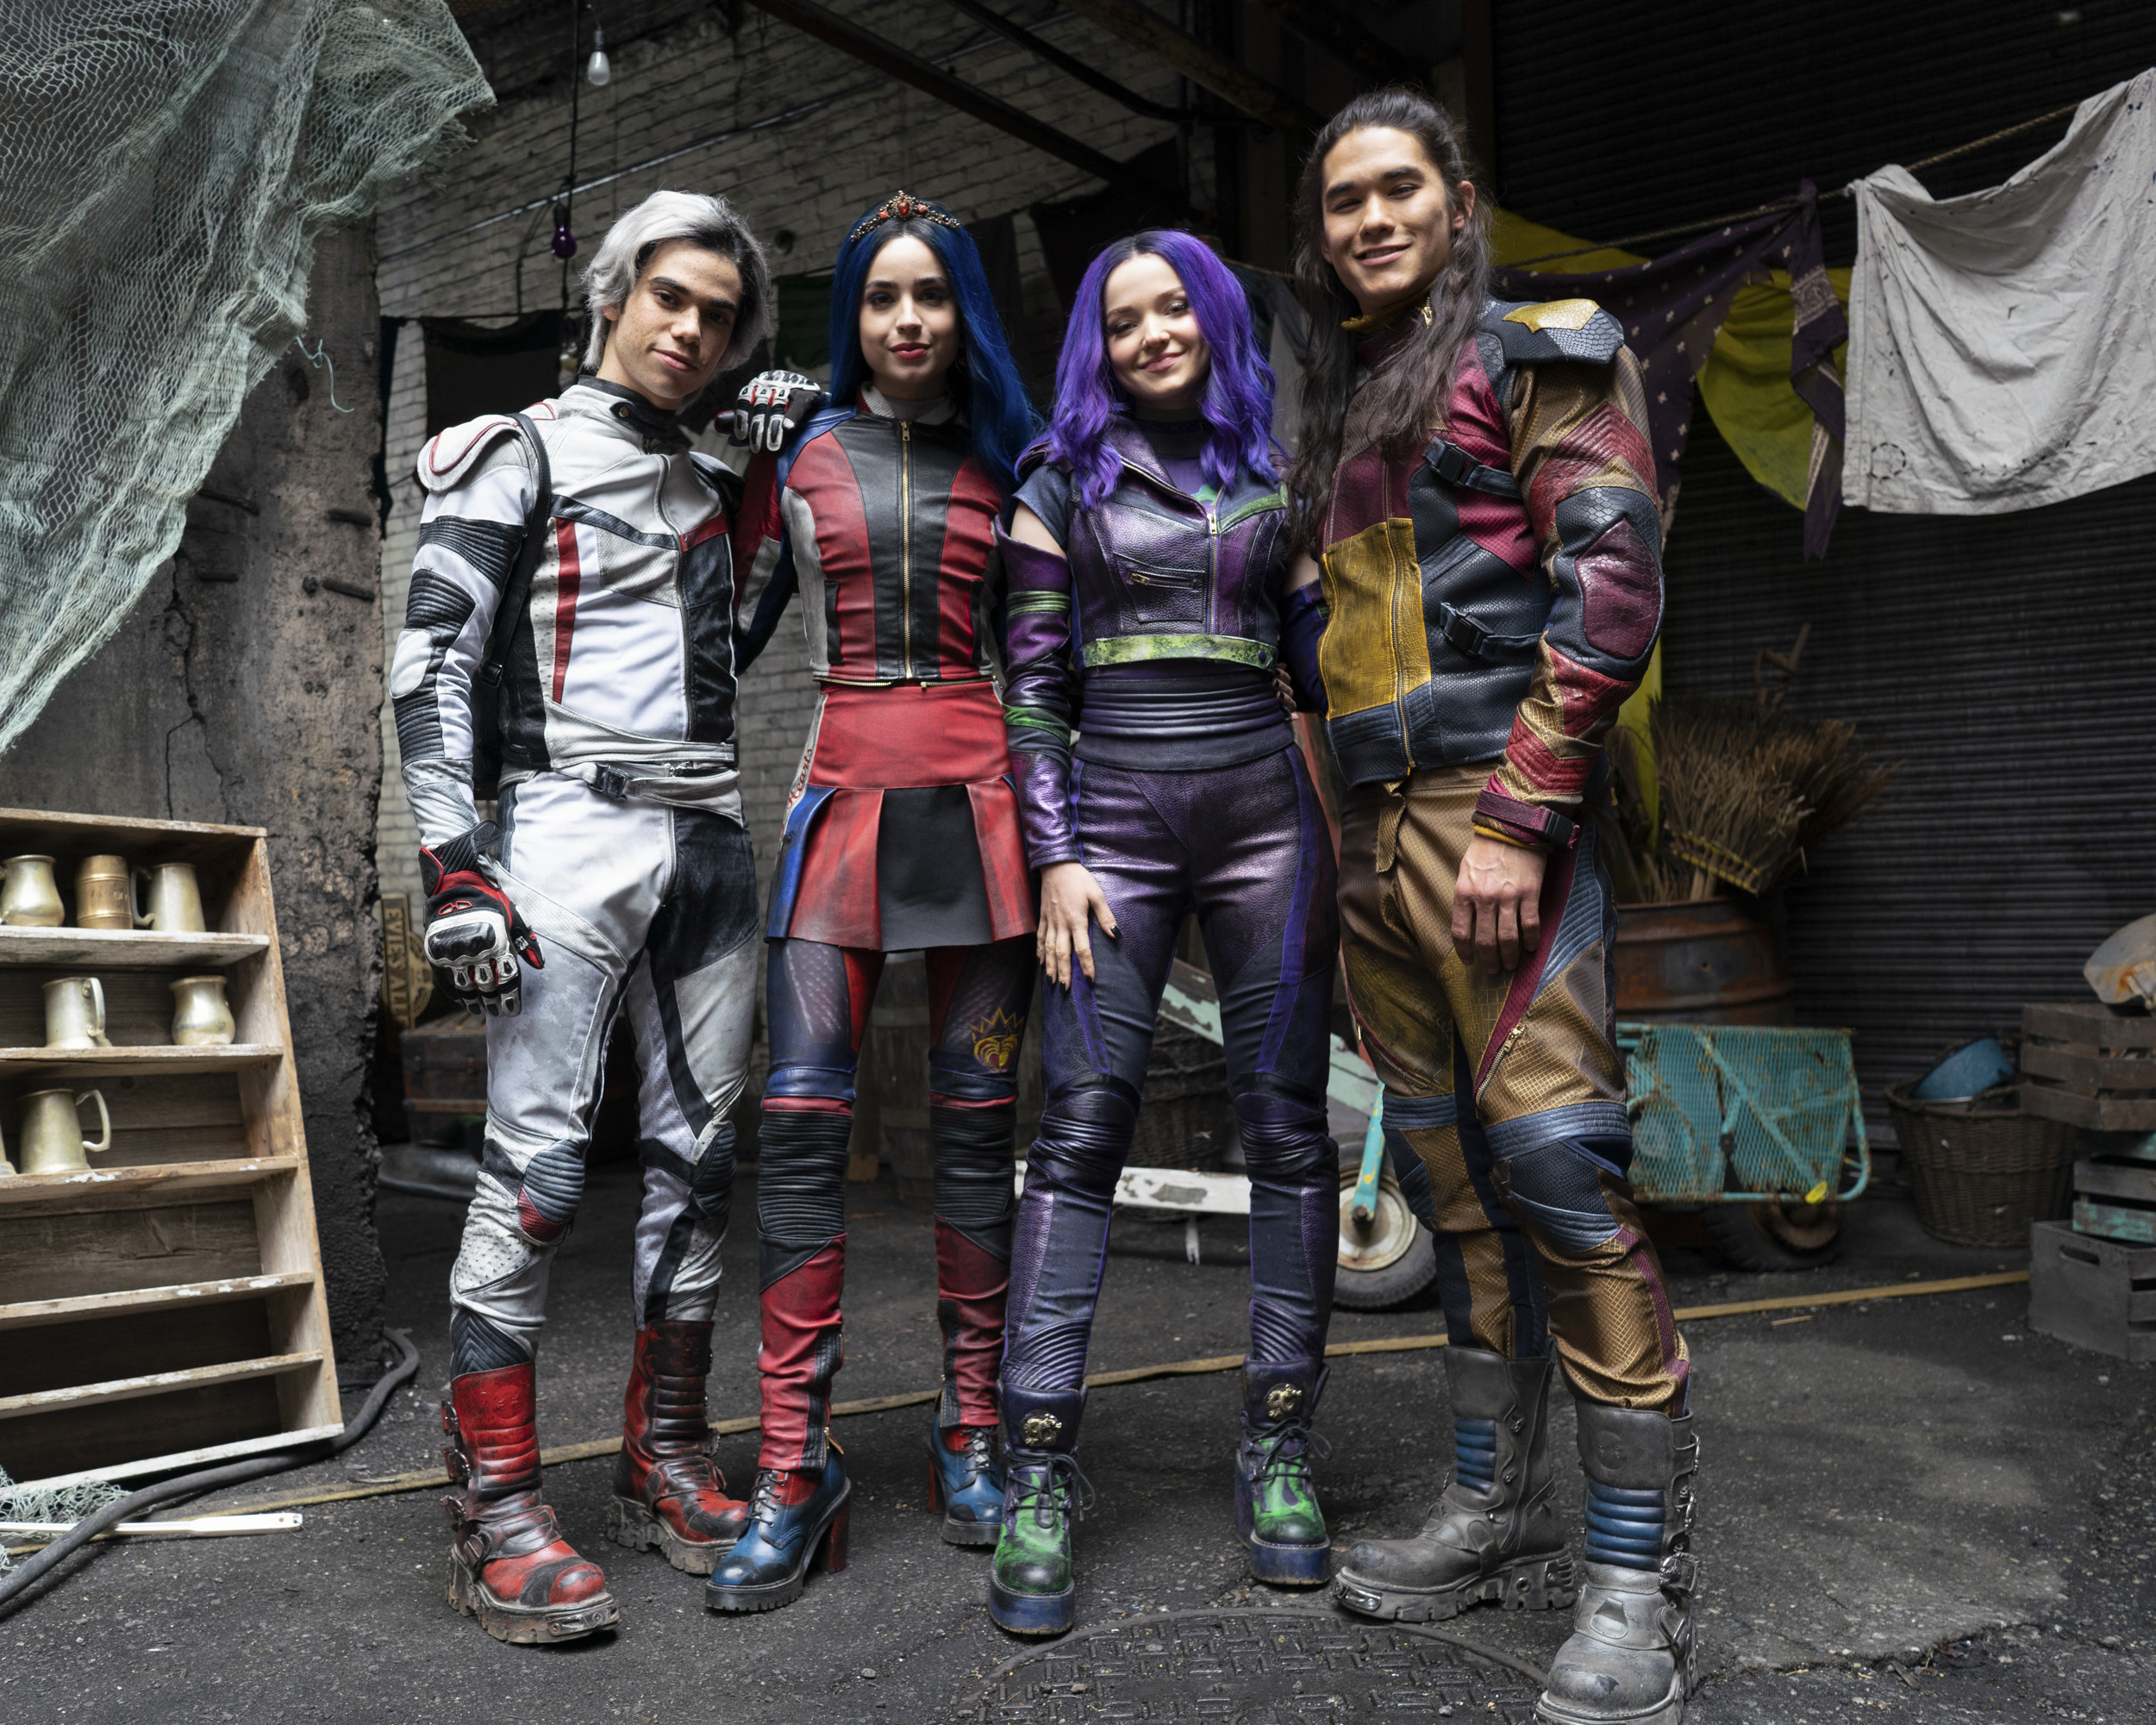 Everything You Need to Know About Descendants 3 - We Got The Funk